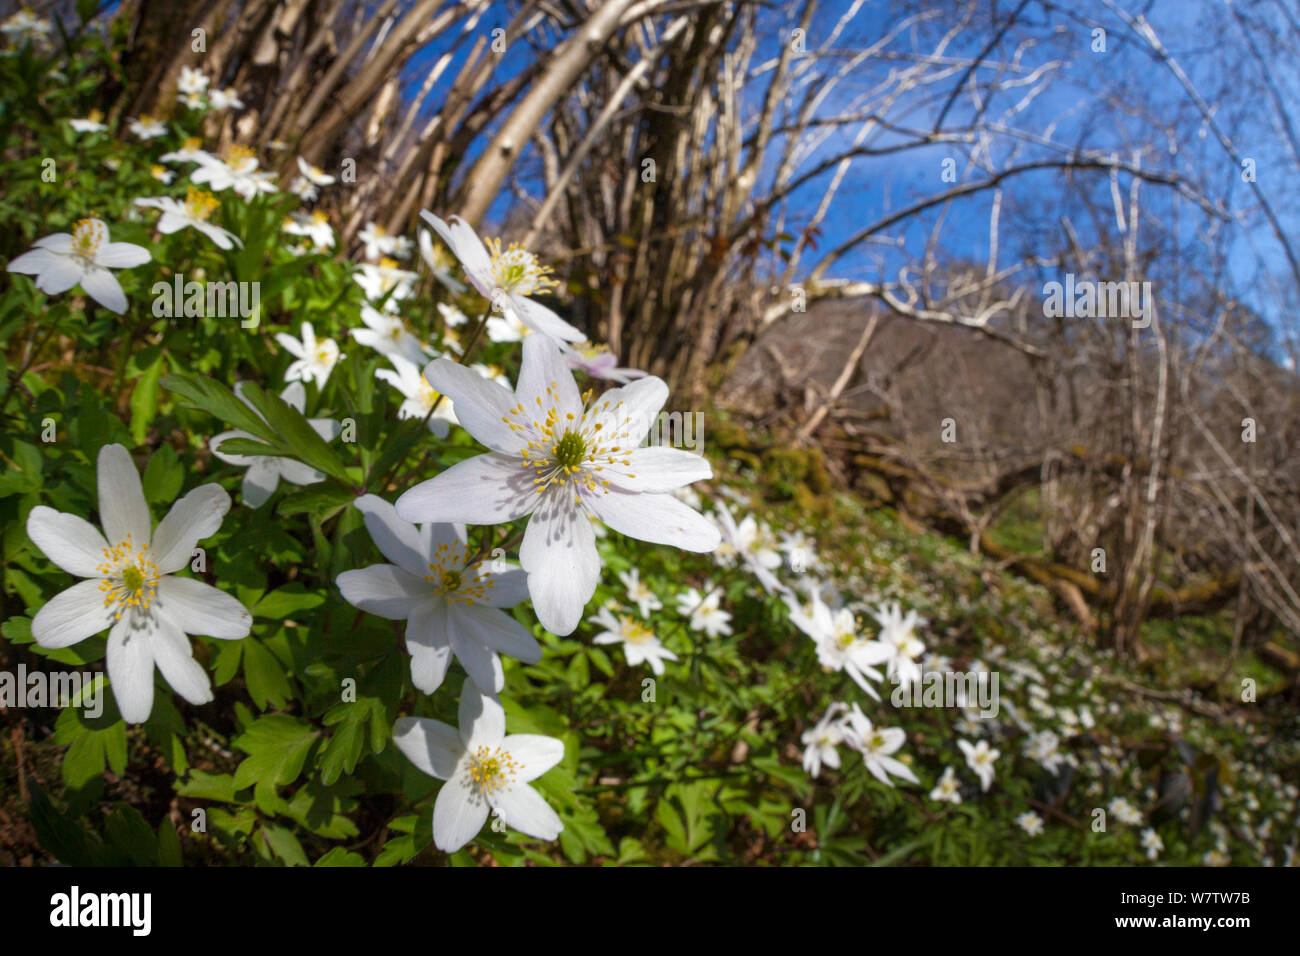 Wood Anemones (Anemone nemorosa) in flower on woodland floor. Wide angle view. Peak District National Park, Derbyshire, UK. April. Stock Photo